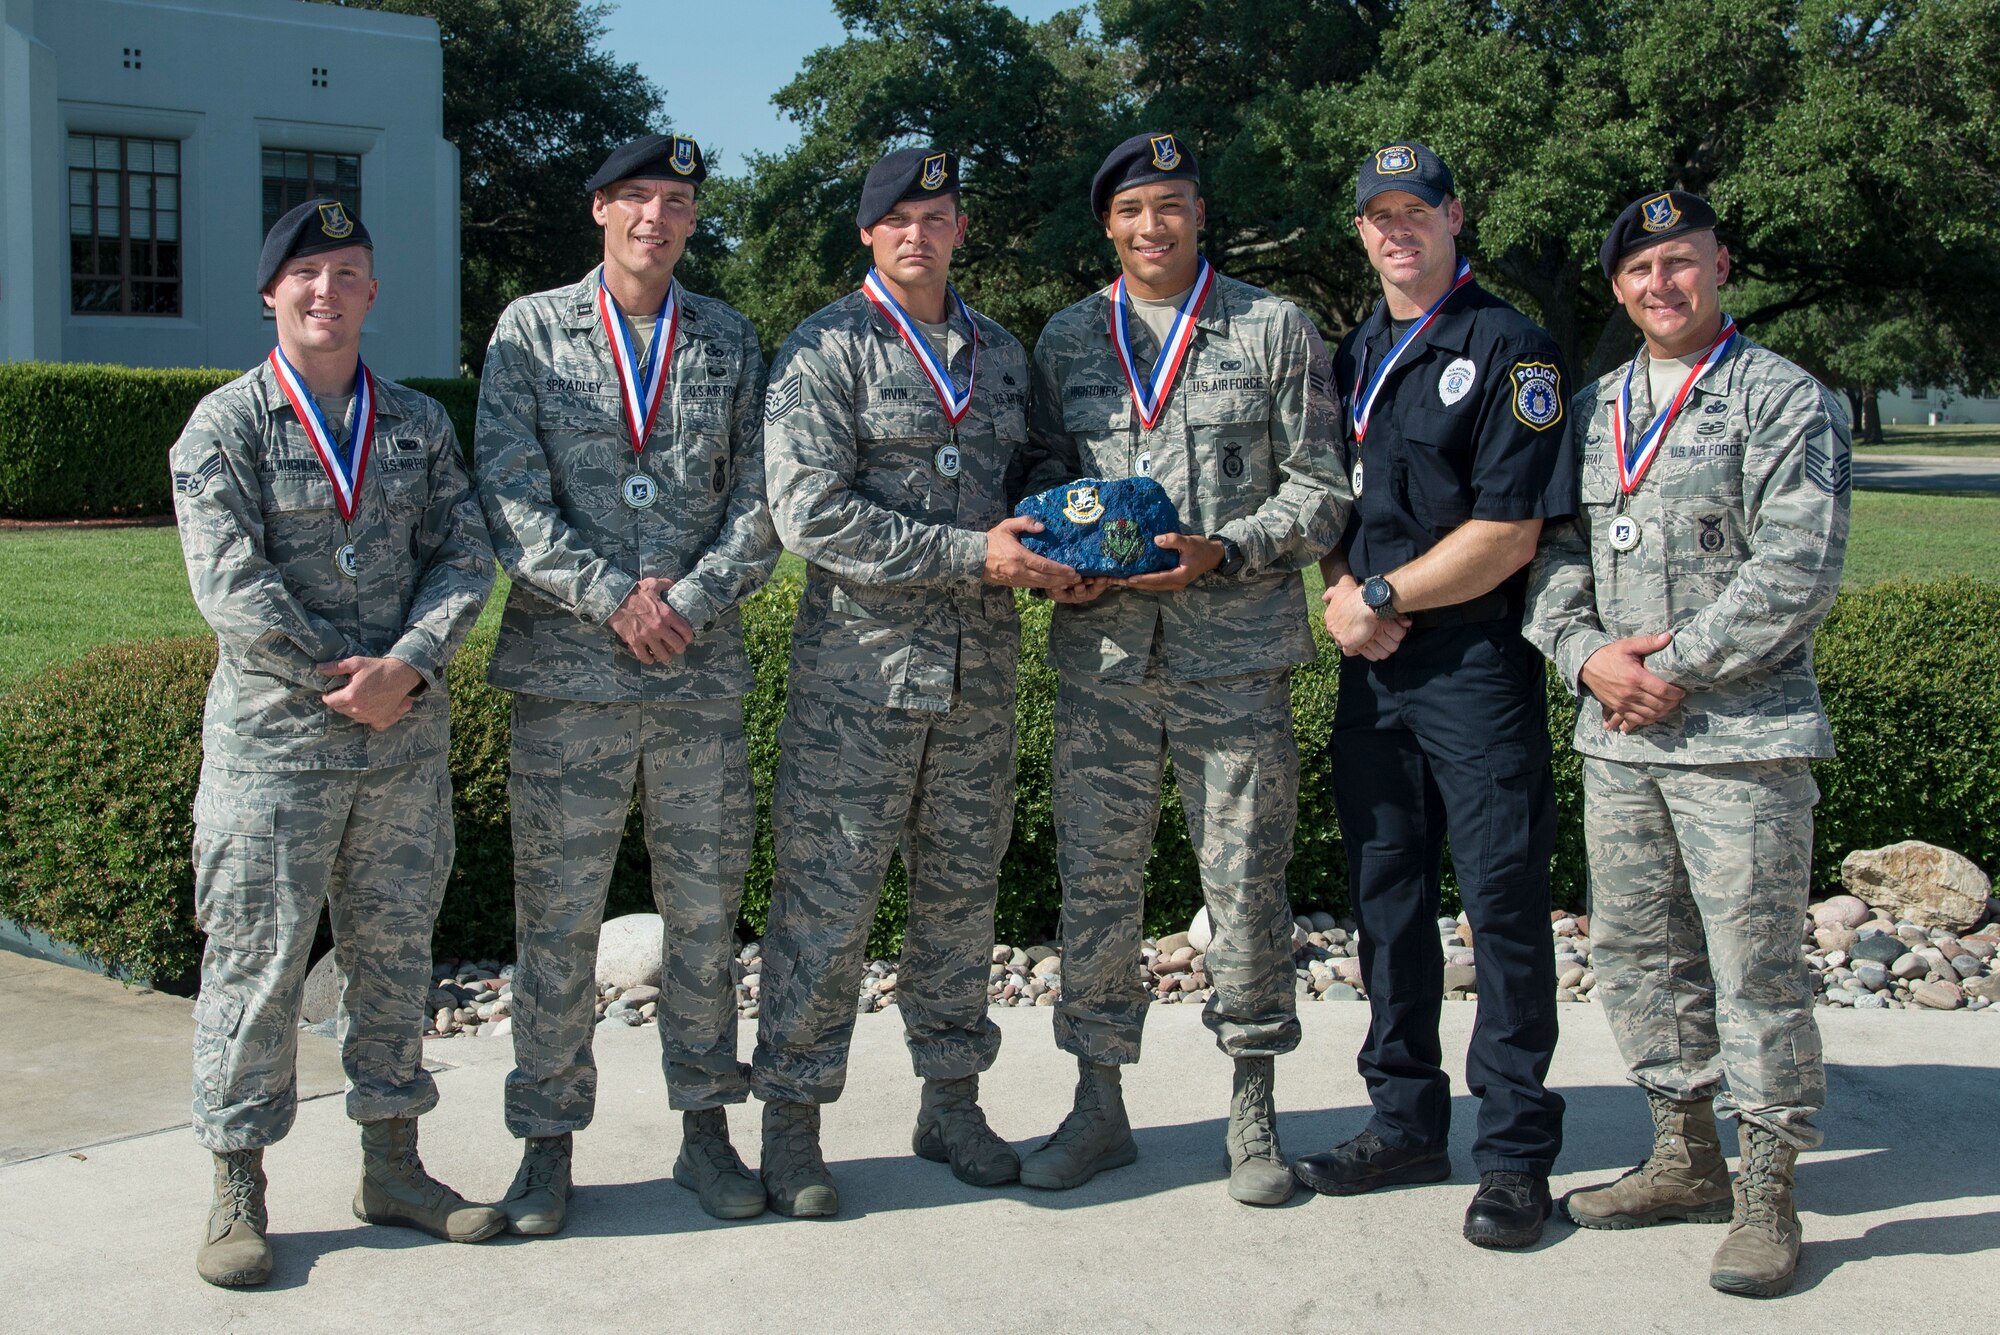 (left to right) Senior Airman William McLaughlin, 502nd Security Forces Squadron, Capt. Nathan Spradley, 902nd SFS, Technical Sgt. Cory Irvin, 37th Training Support Squadron, Senior Airman David Hightower, 56th SFS, Officer Jonathan Vance and Master Sgt. James Murray of the 802nd SFS, pose for a photo after being chosen as the representatives of Air Education and Training Command’s Defender Challenge team July 27, 2018, at Joint Base San Antonio-Randolph, Texas. Defender Challenge is a Security Forces competition that pits teams against each other in realistic weapons, dismounted operations and relay challenge events.